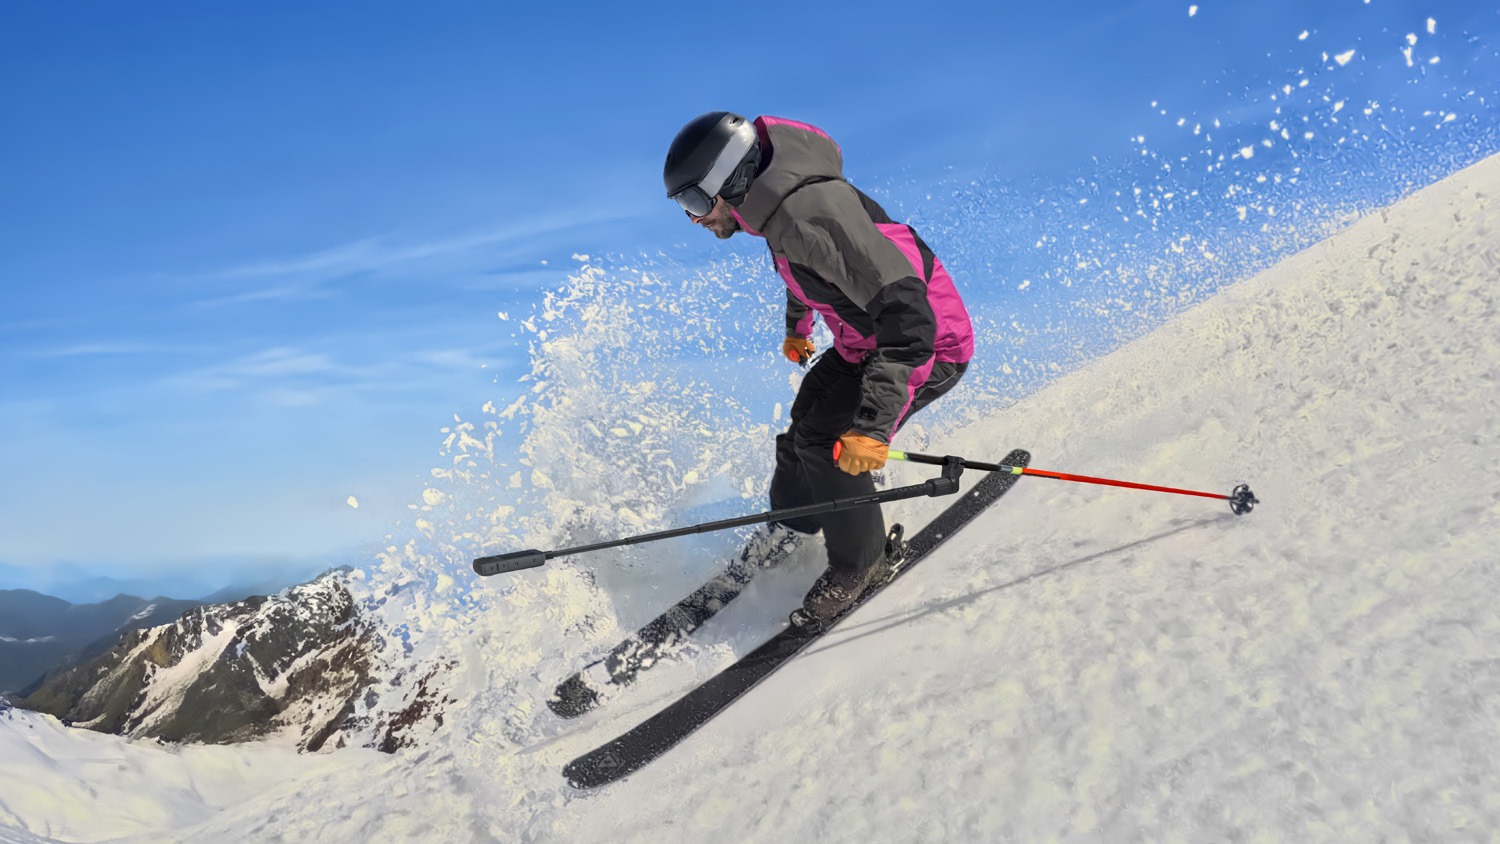 A skier descending a snowy slope, dressed in a pink and black ski suit, with a 360-degree camera attached to a selfie stick in their hand, spraying snow as they make a sharp turn.